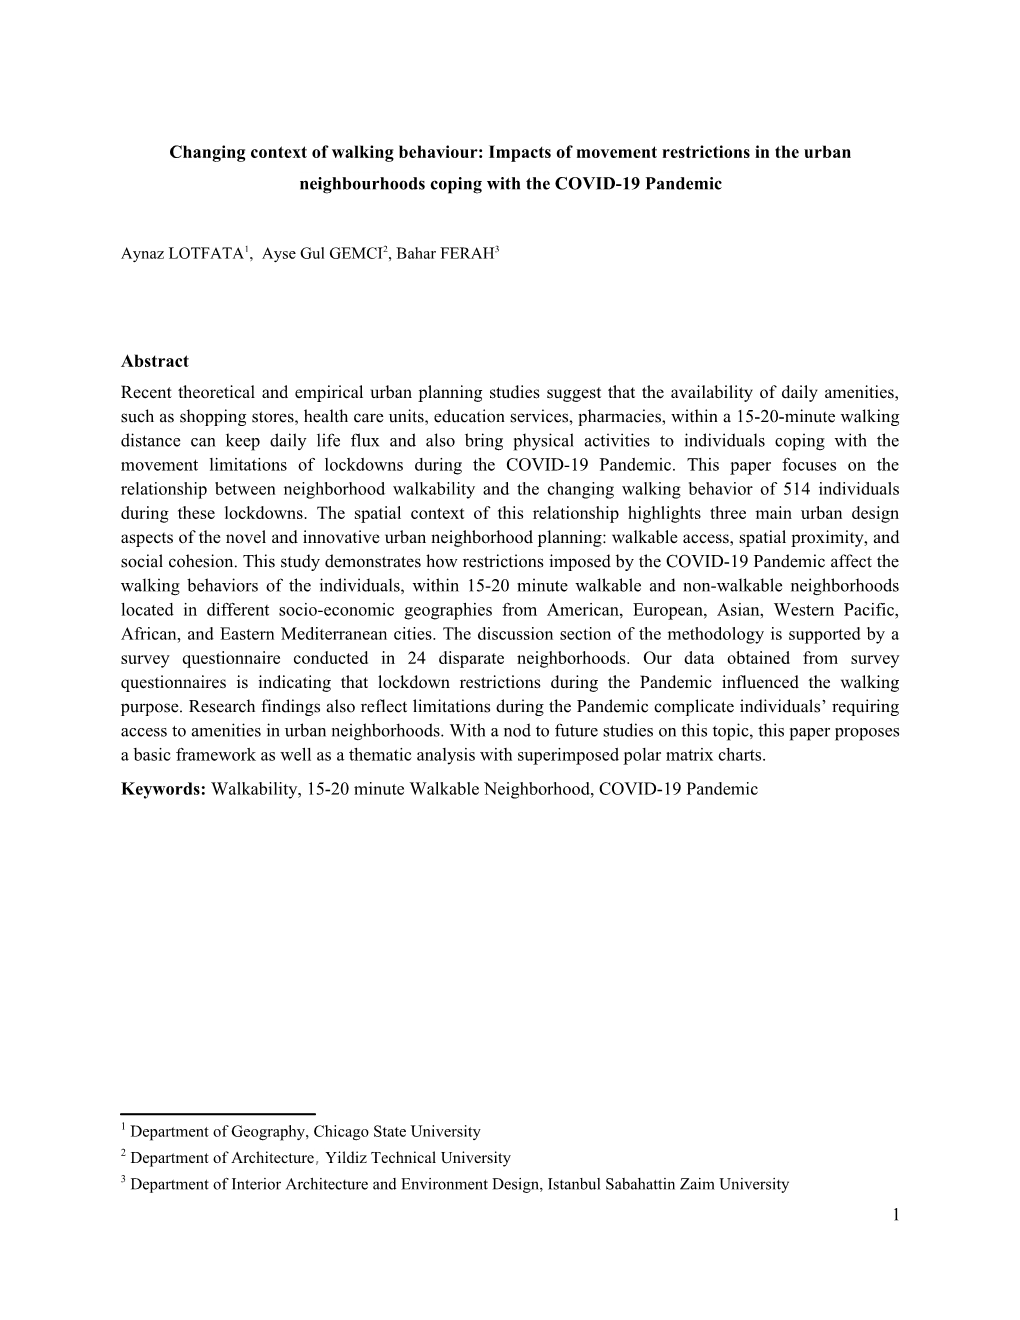 Impacts of Movement Restrictions in the Urban Neighbourhoods Coping with the COVID-19 Pandemic